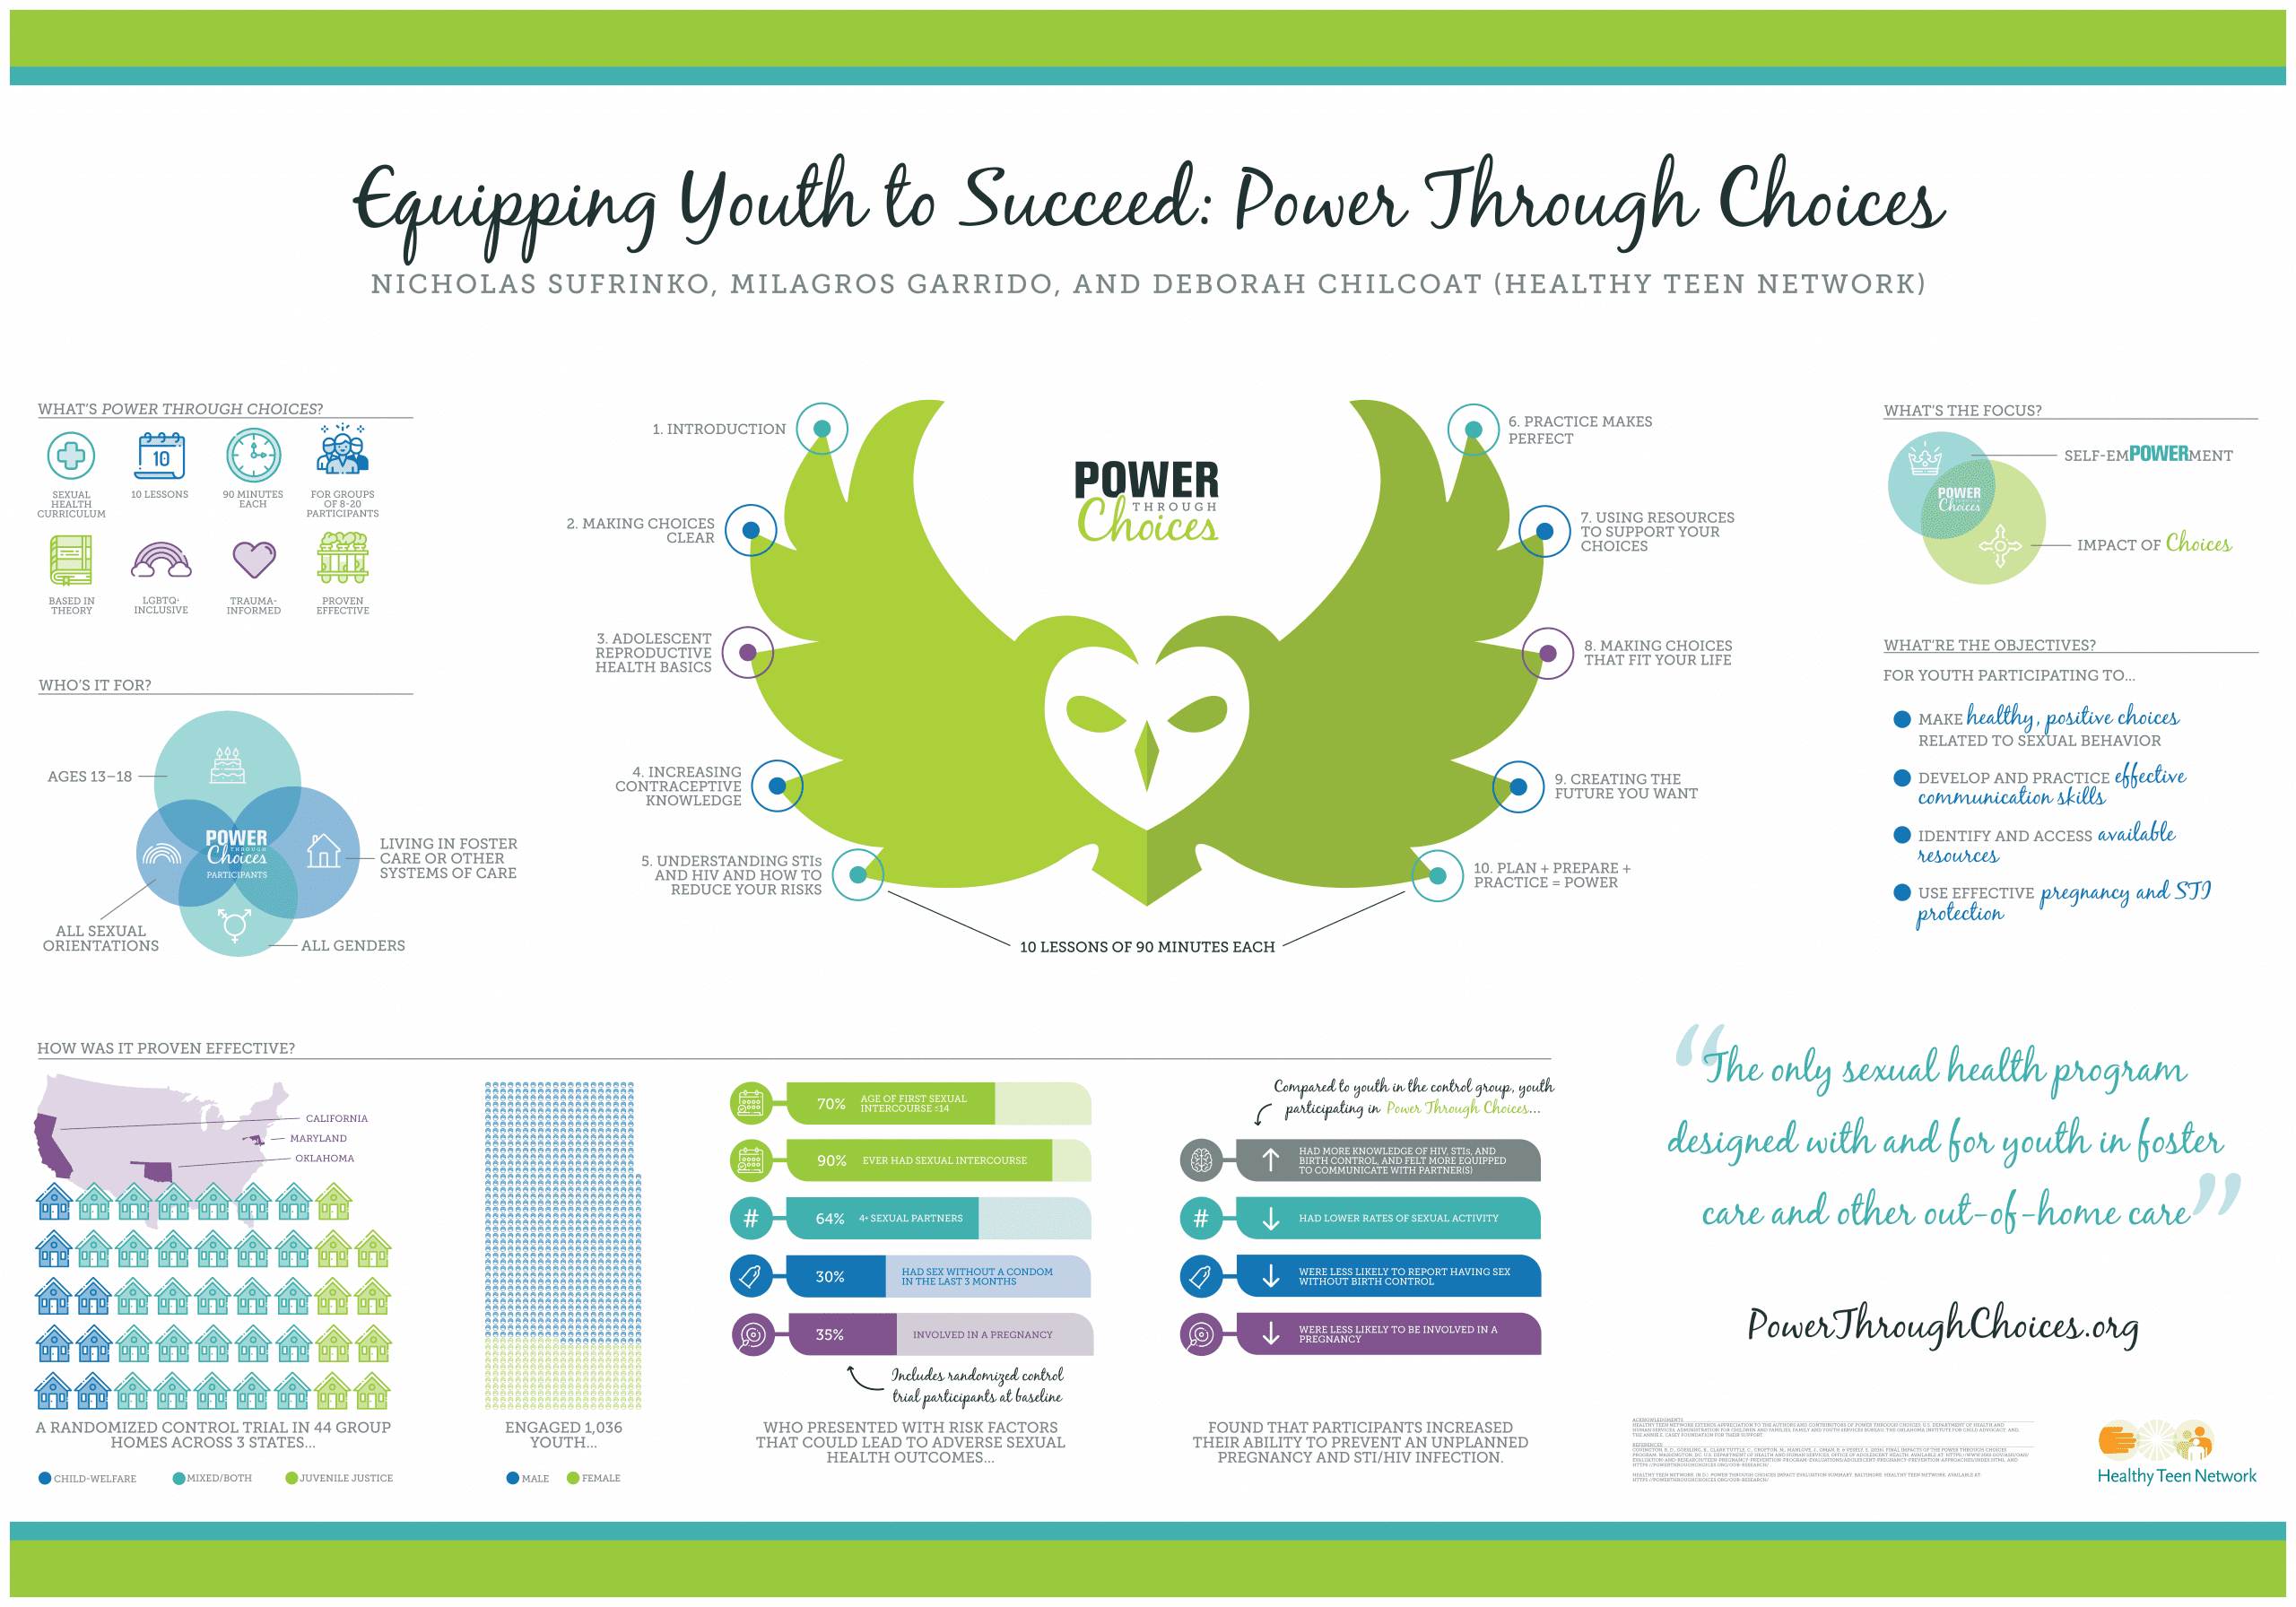 Infographic of Power Through Choices, curriculum overview and evaluation results